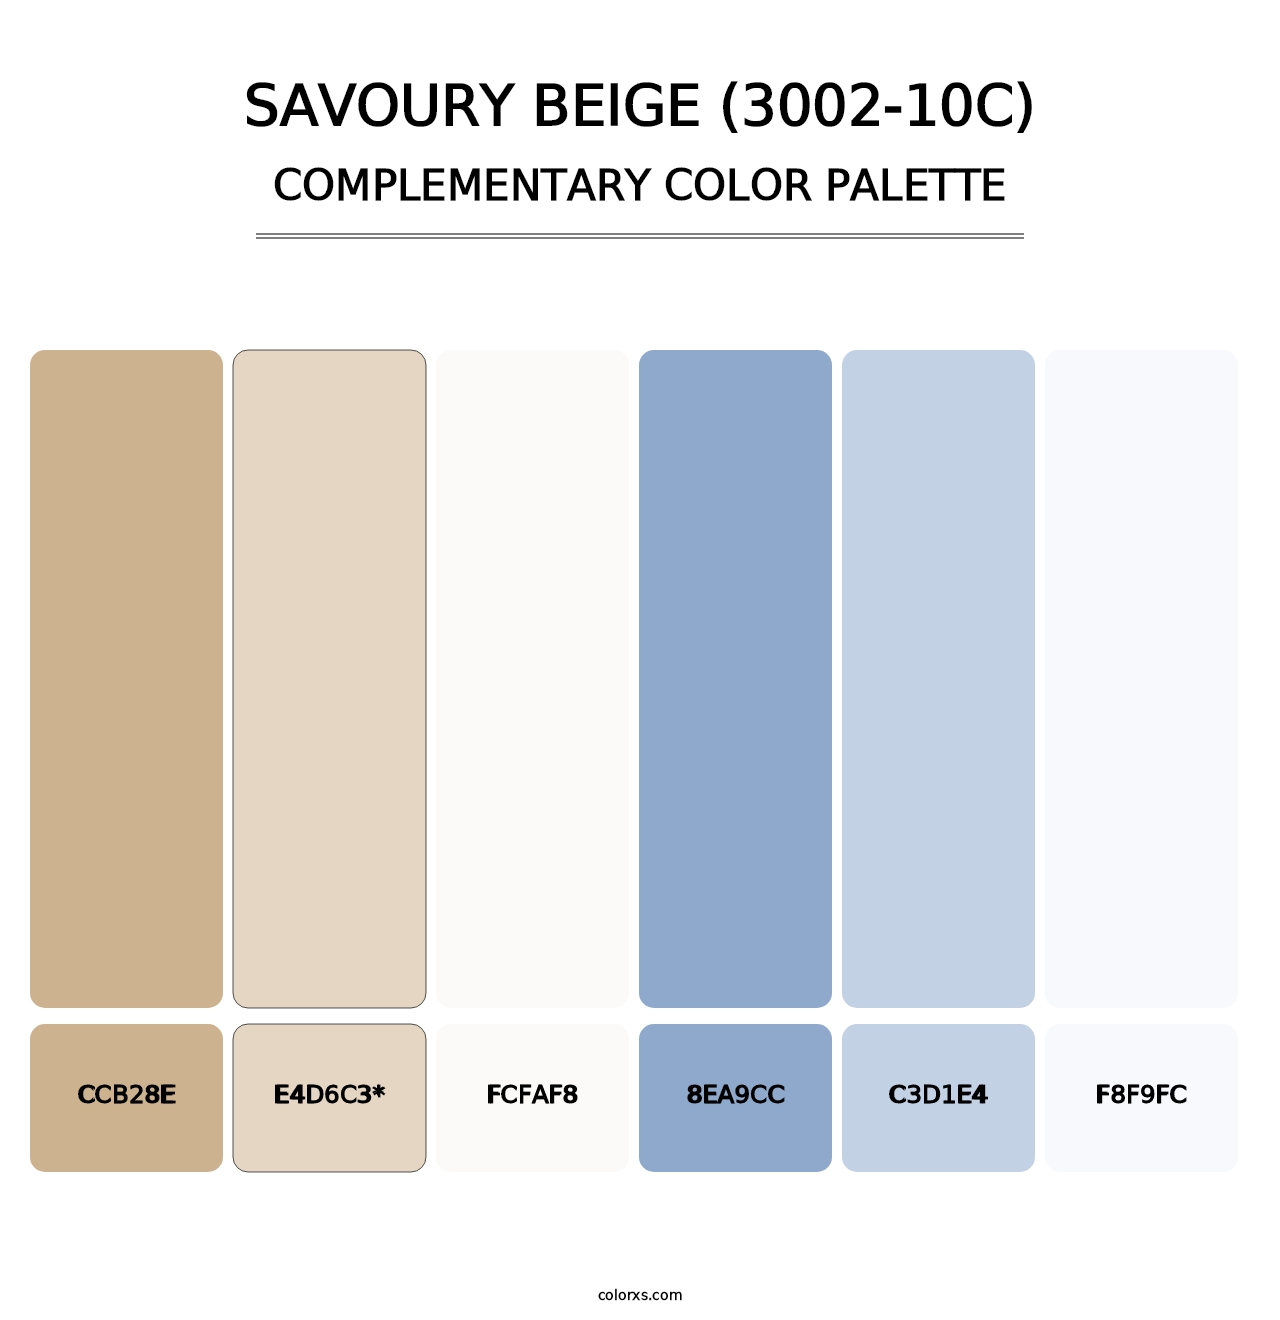 Savoury Beige (3002-10C) - Complementary Color Palette